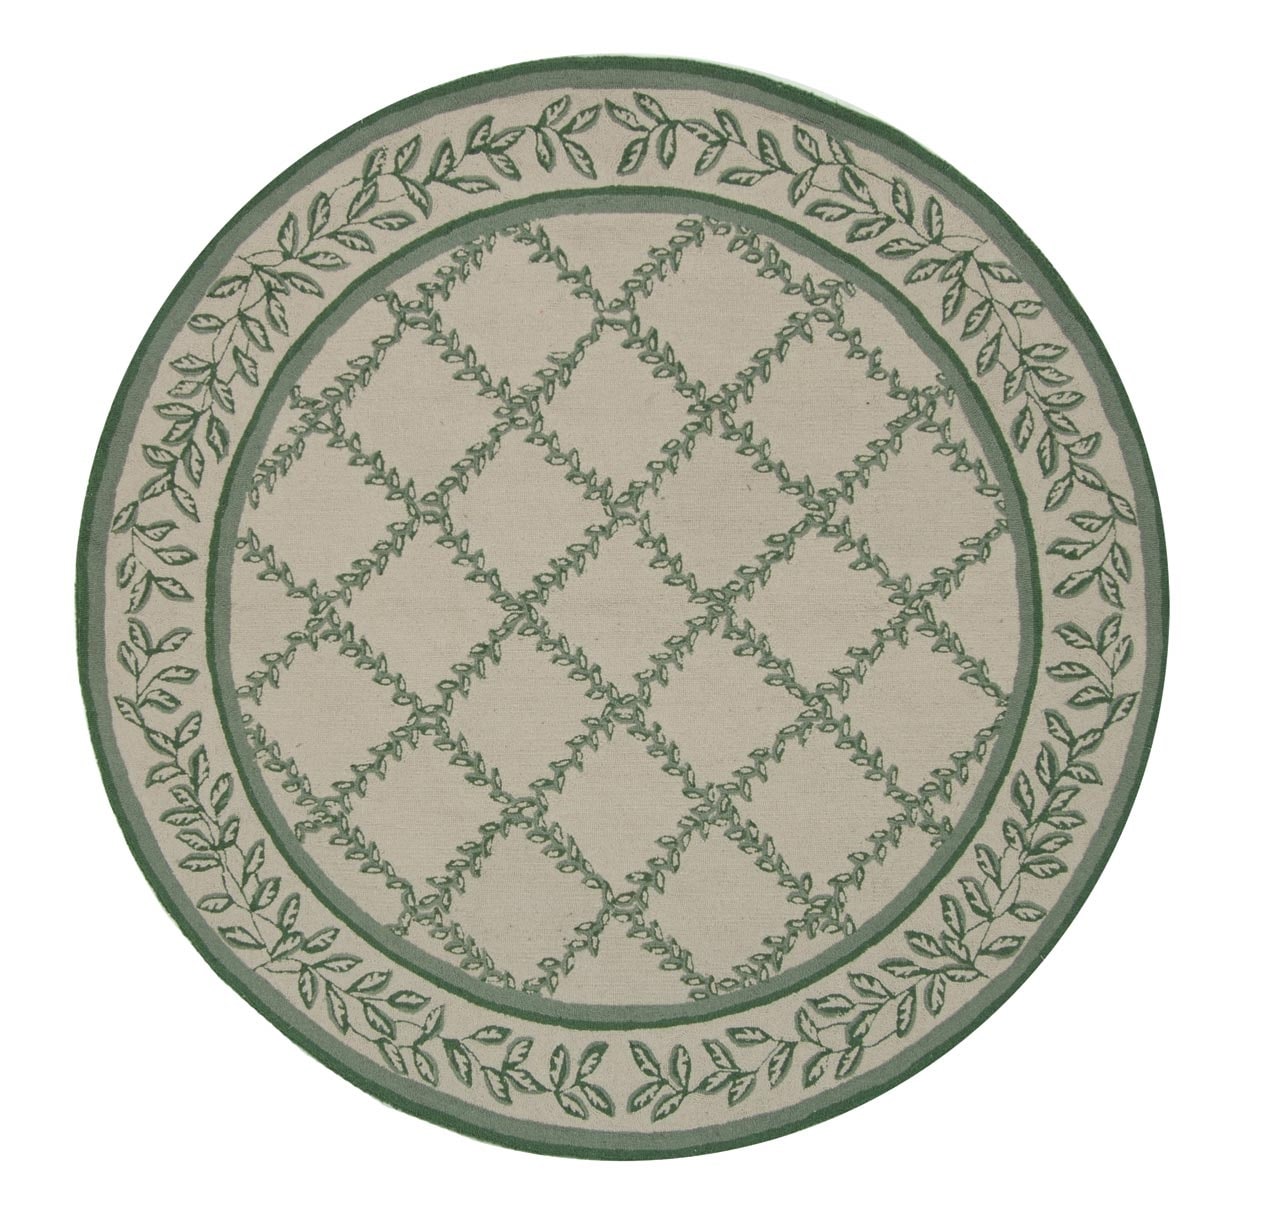 Safavieh Chelsea Collection HK230B Hand-Hooked Ivory and Light Green Wool  Round Area Rug, 5 feet 6 inches in Diameter (5'6 Diameter) : :  Home